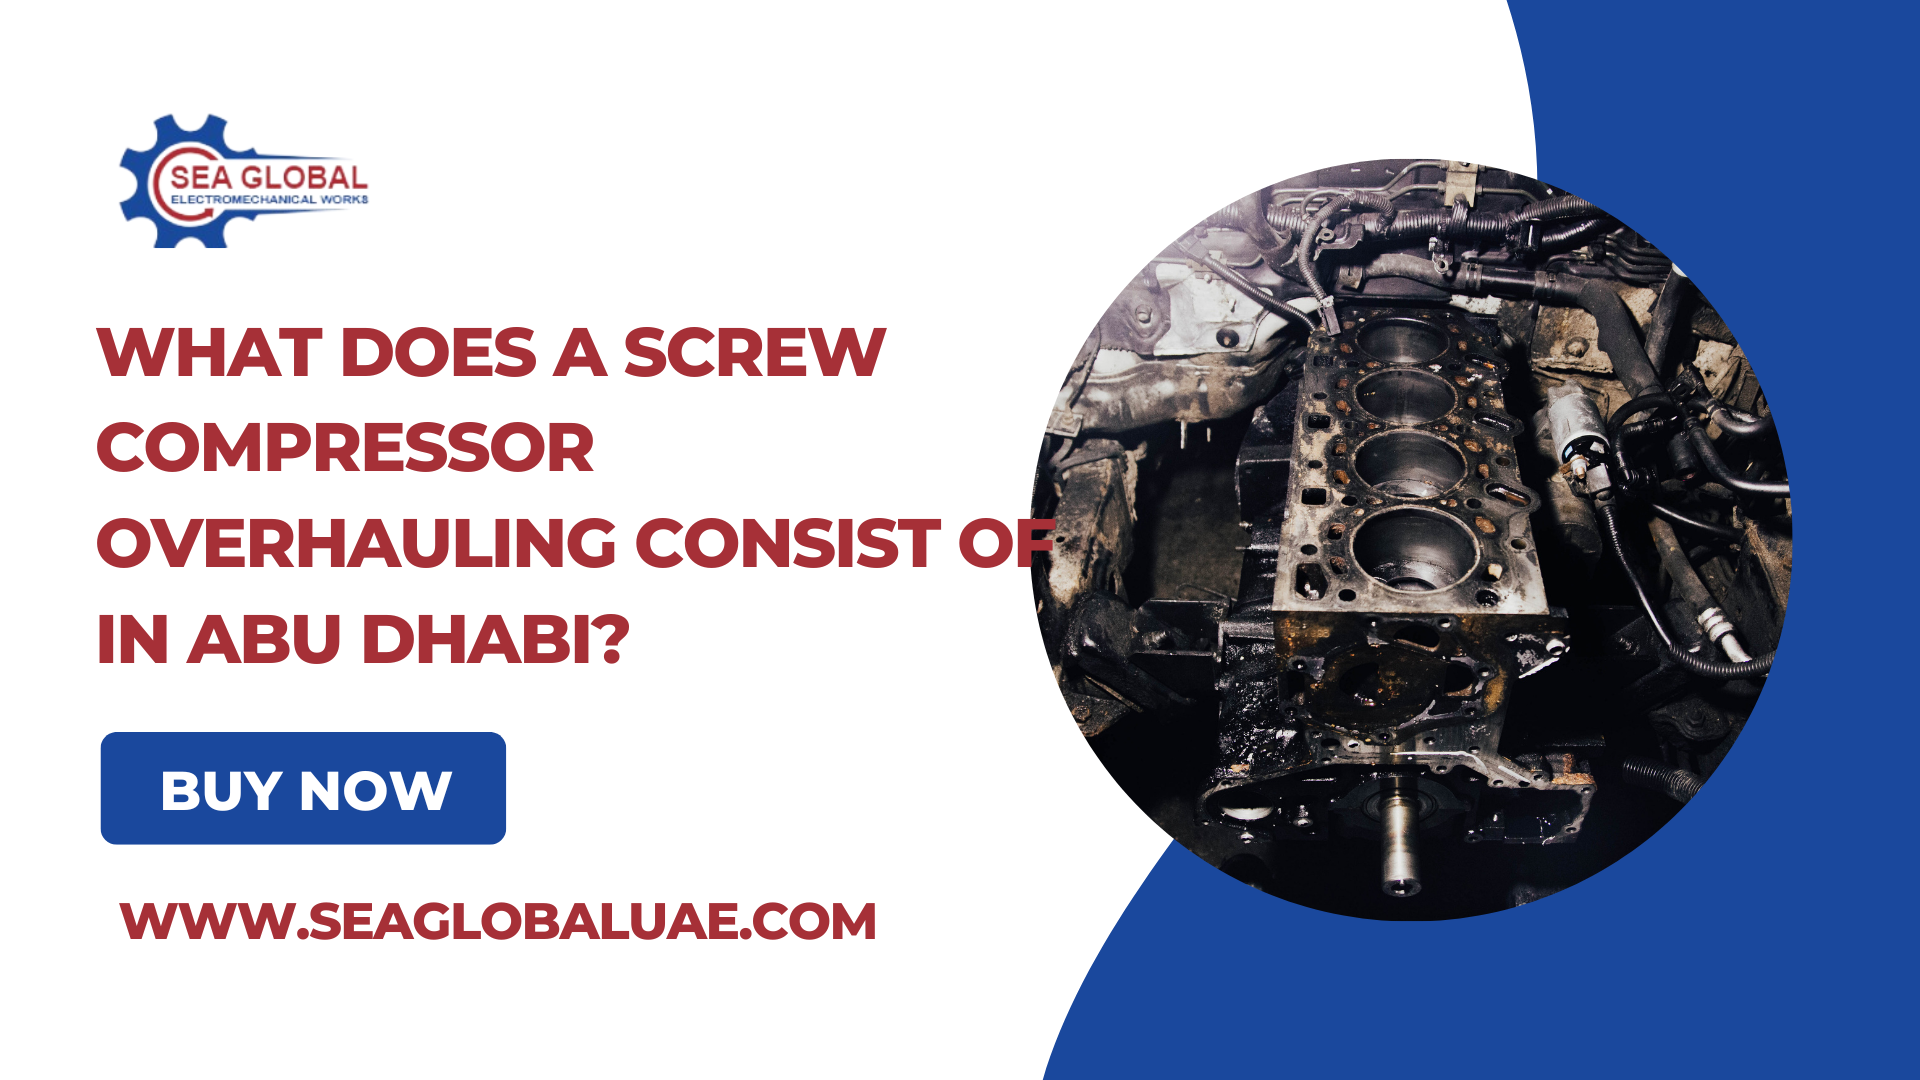 What Does a Screw Compressor Overhauling Consist of in Abu Dhabi?